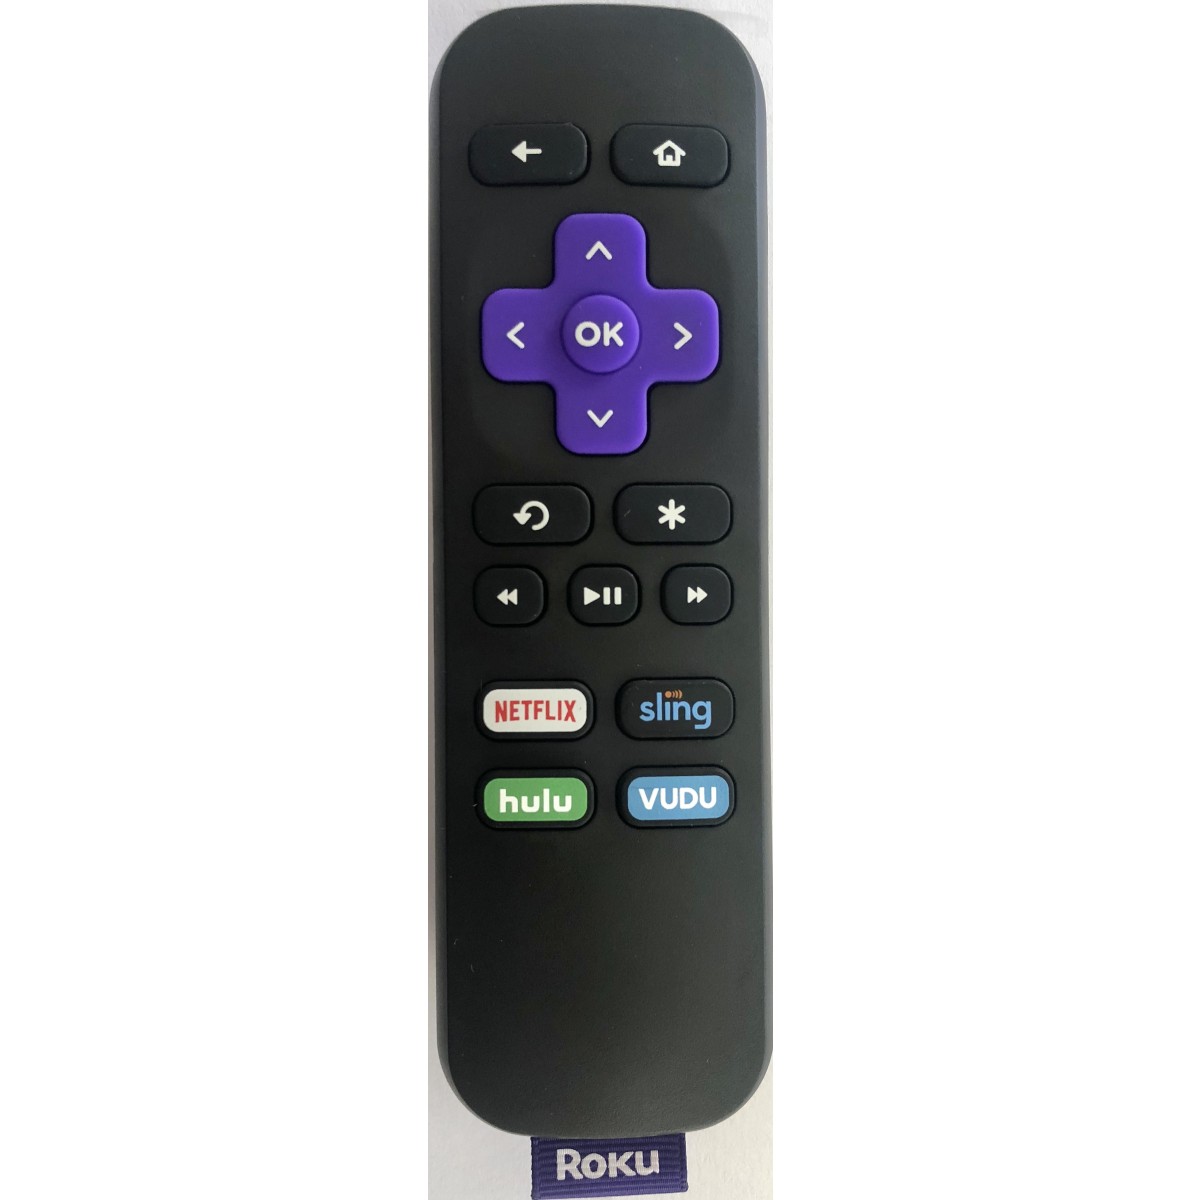 Genuine Roku RC108 Remote With Dedicated Buttons Netflix Sling Hulu Vudu Compatible with: Roku LT Roku HD, XD, XDS Roku N1 Roku 1 Roku 2 Roku 2 HD, XD, XS Roku 3 Roku Express Roku Express+ - image 3 of 3